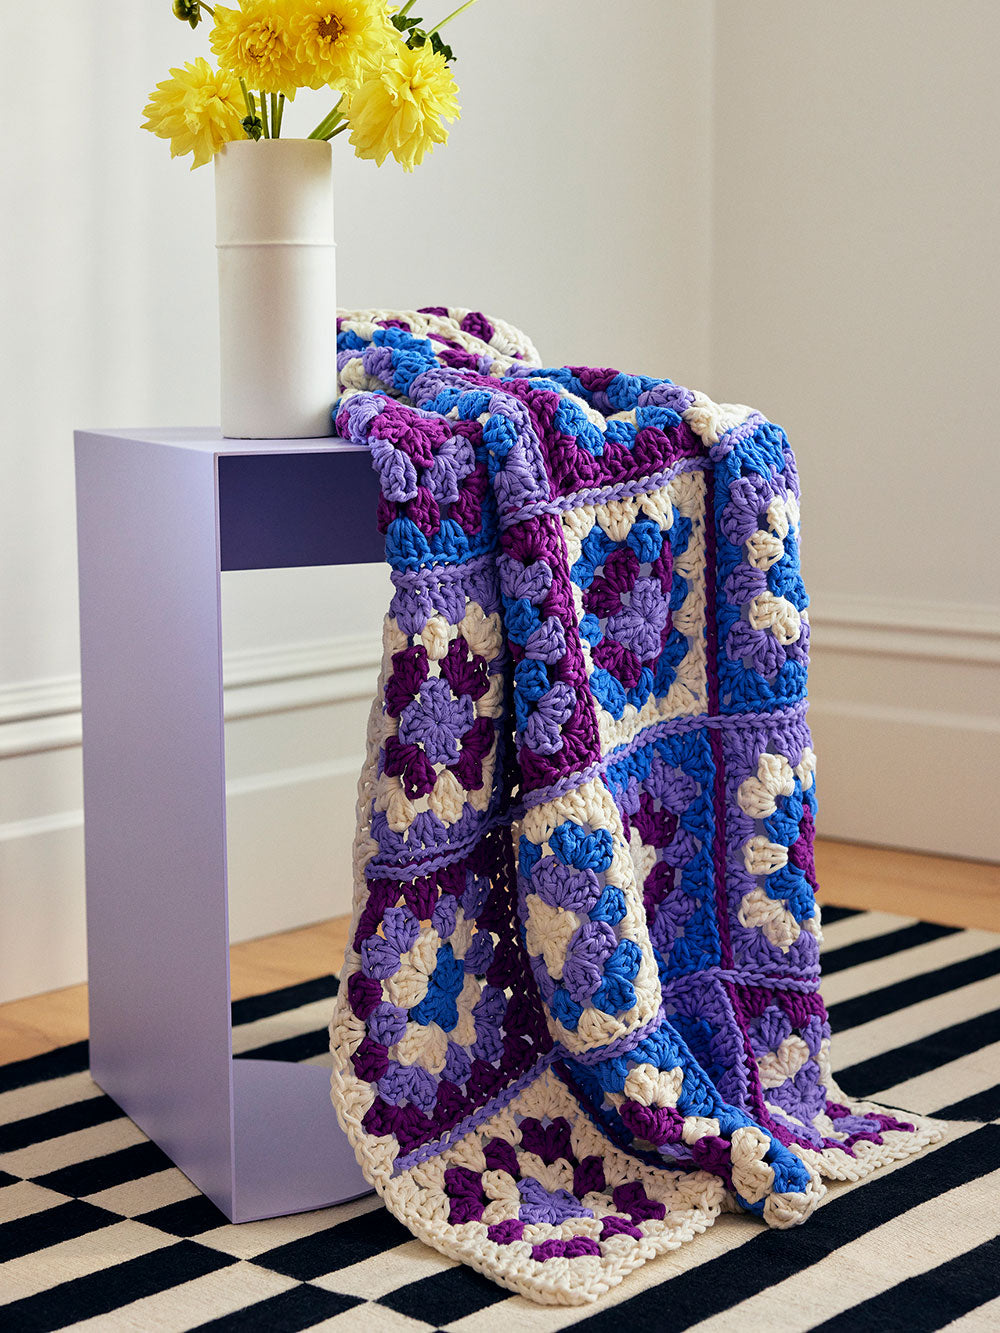 Image of a multi-colour granny square baby blanket draped over a purple side table with a vase of yellow flowers. 